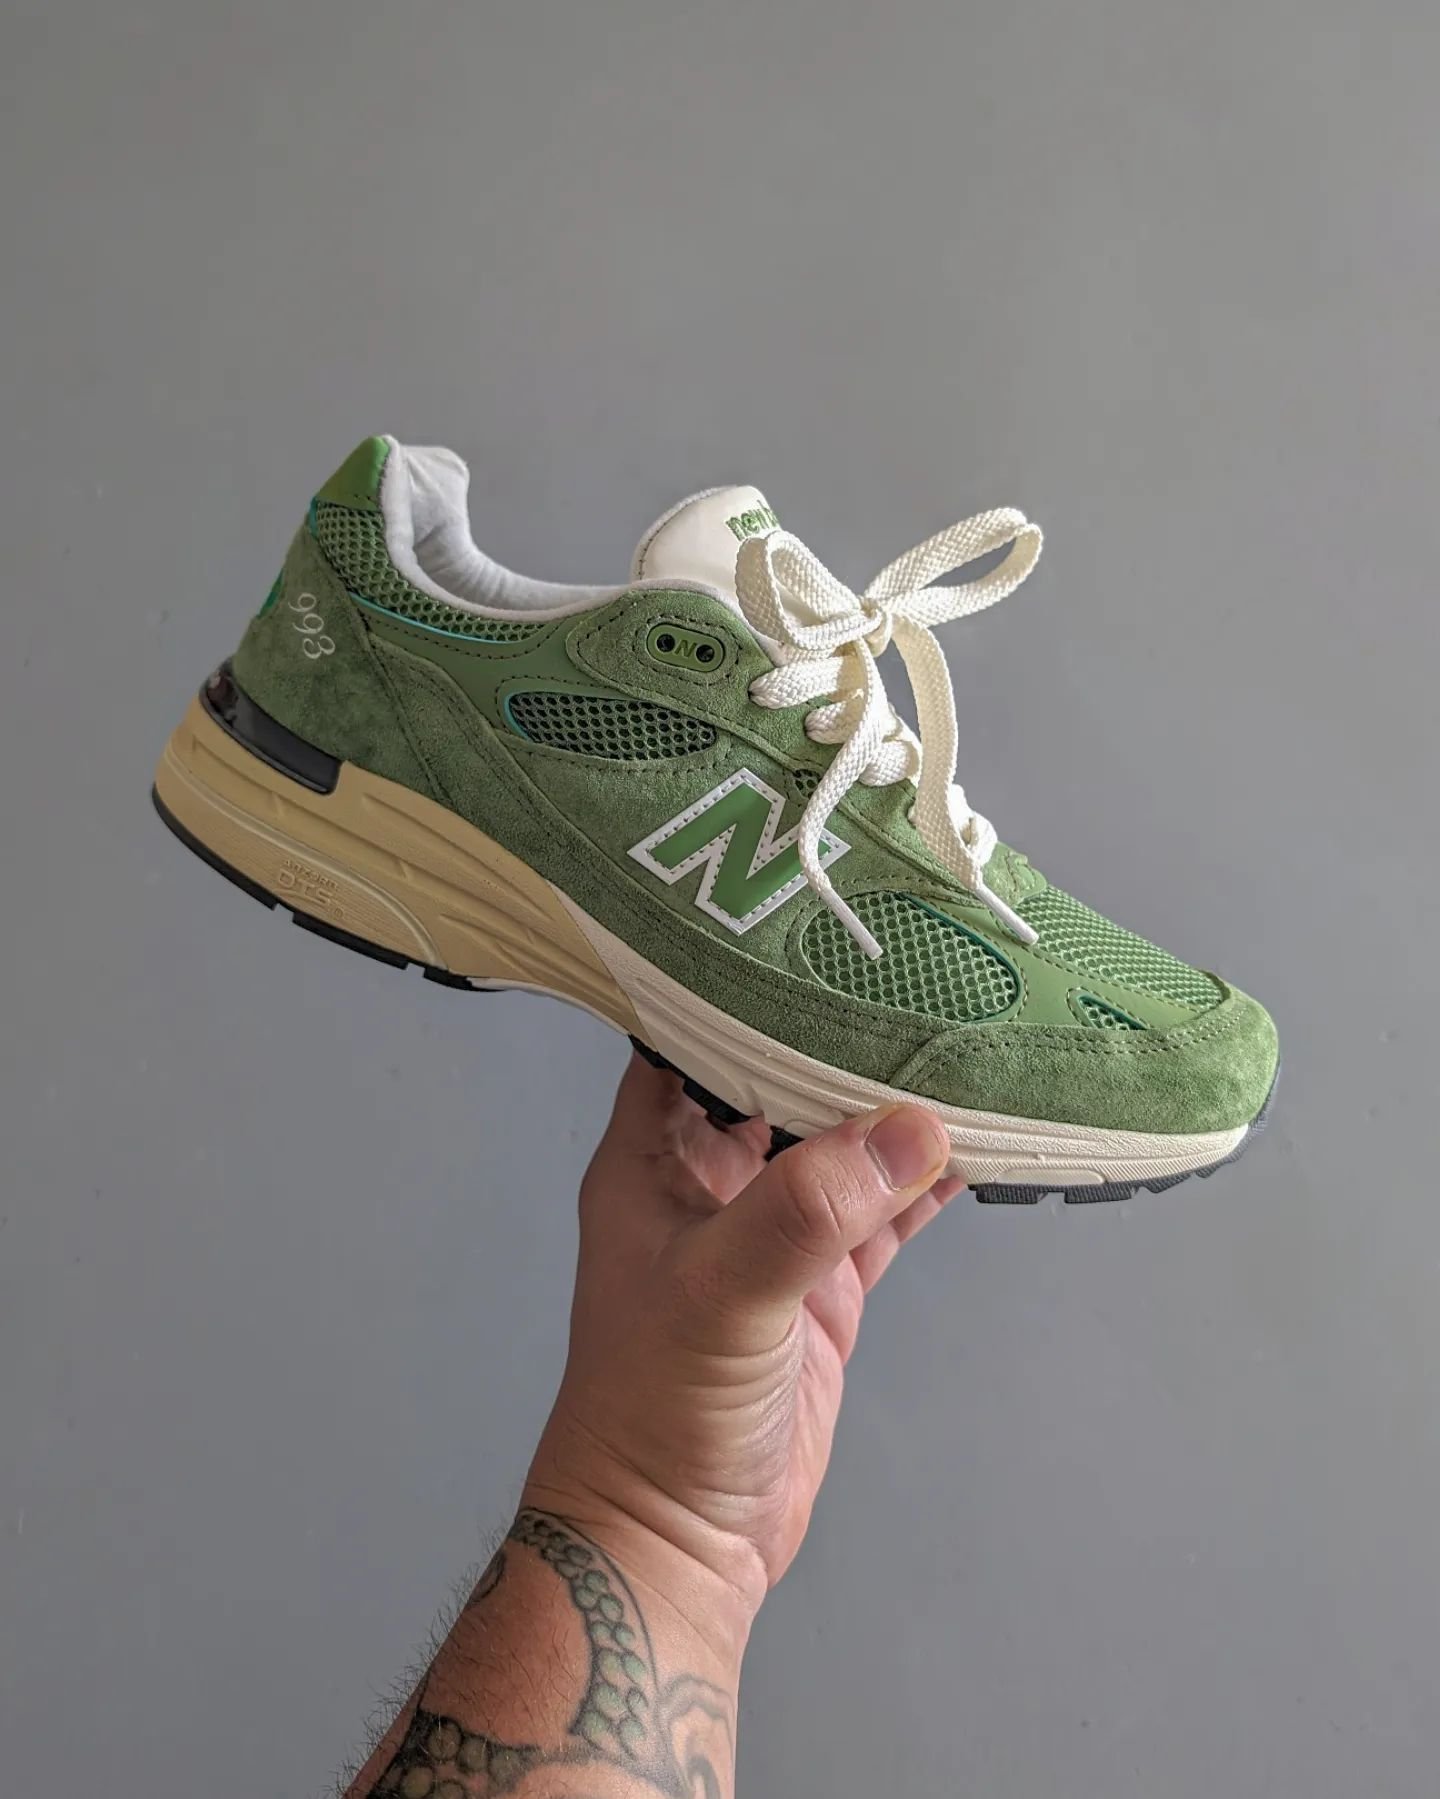 The latest review from @riblets1218 features the @newbalancelifestyle hive Green 993s. Head over to our website for the full review #epsilonmagazine